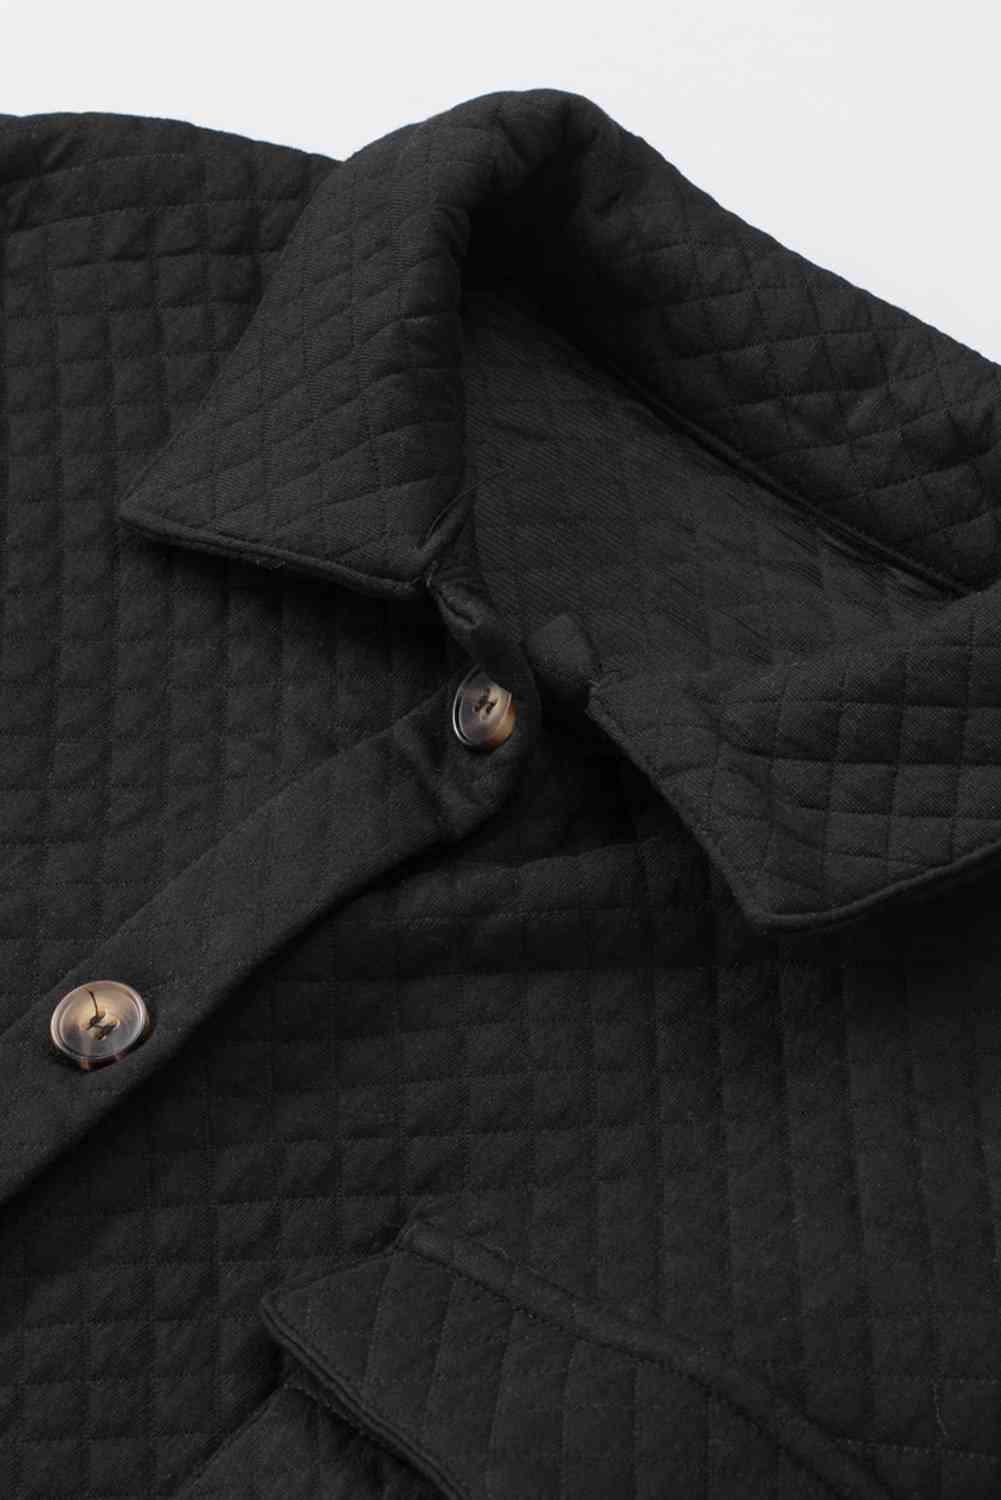 Vintage Look Button Down Quilted Shirt Jacket-MXSTUDIO.COM